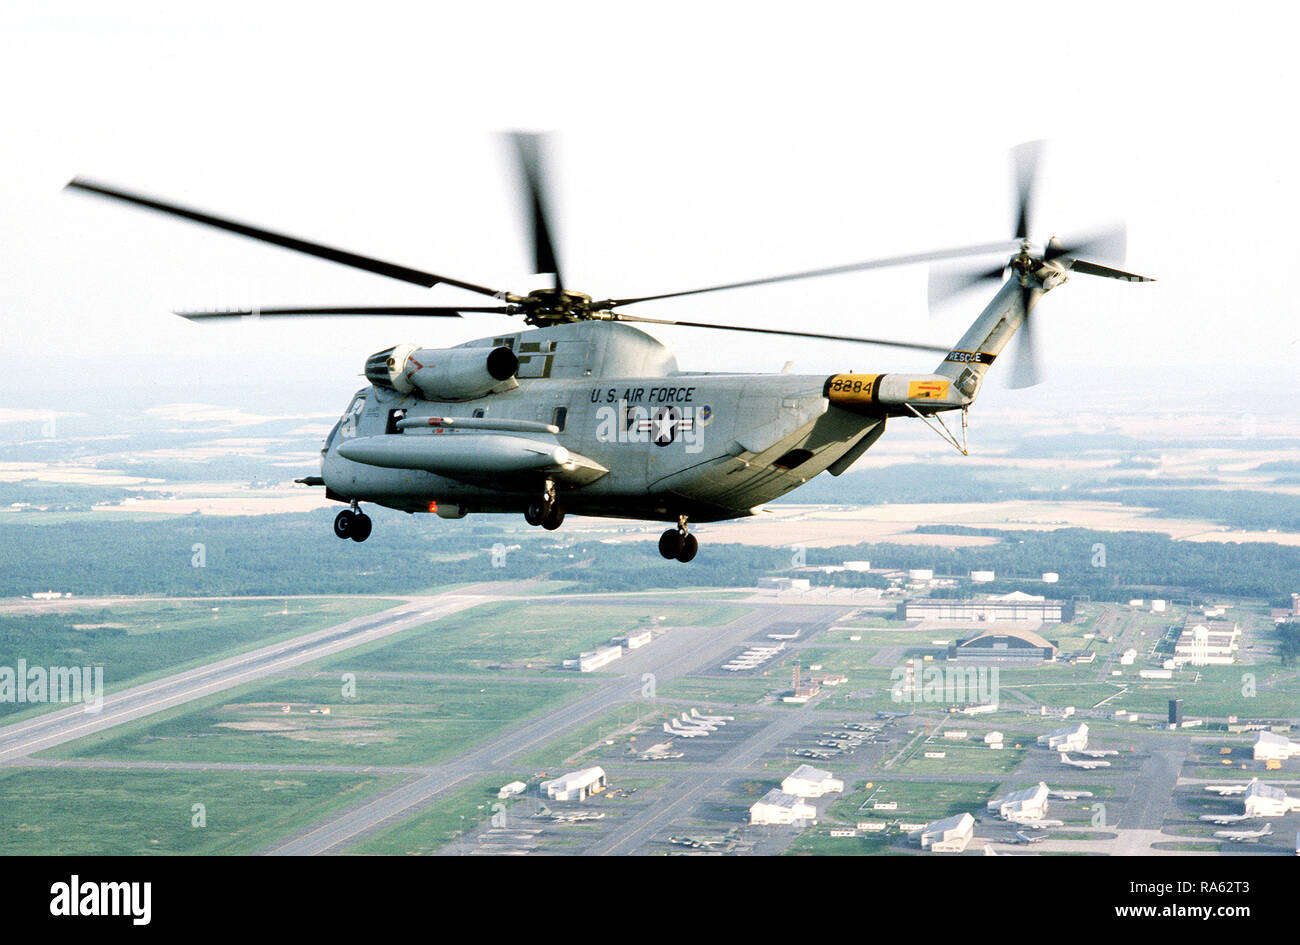 1978 - An air-to-air left side view of a 39th Aerospace Rescue and Recovery Wing HH-53 helicopter over Loring Air Force Base, Maine, while en route from Eglin Air Force Base, Fla., to Woodbridge, England. Stock Photo